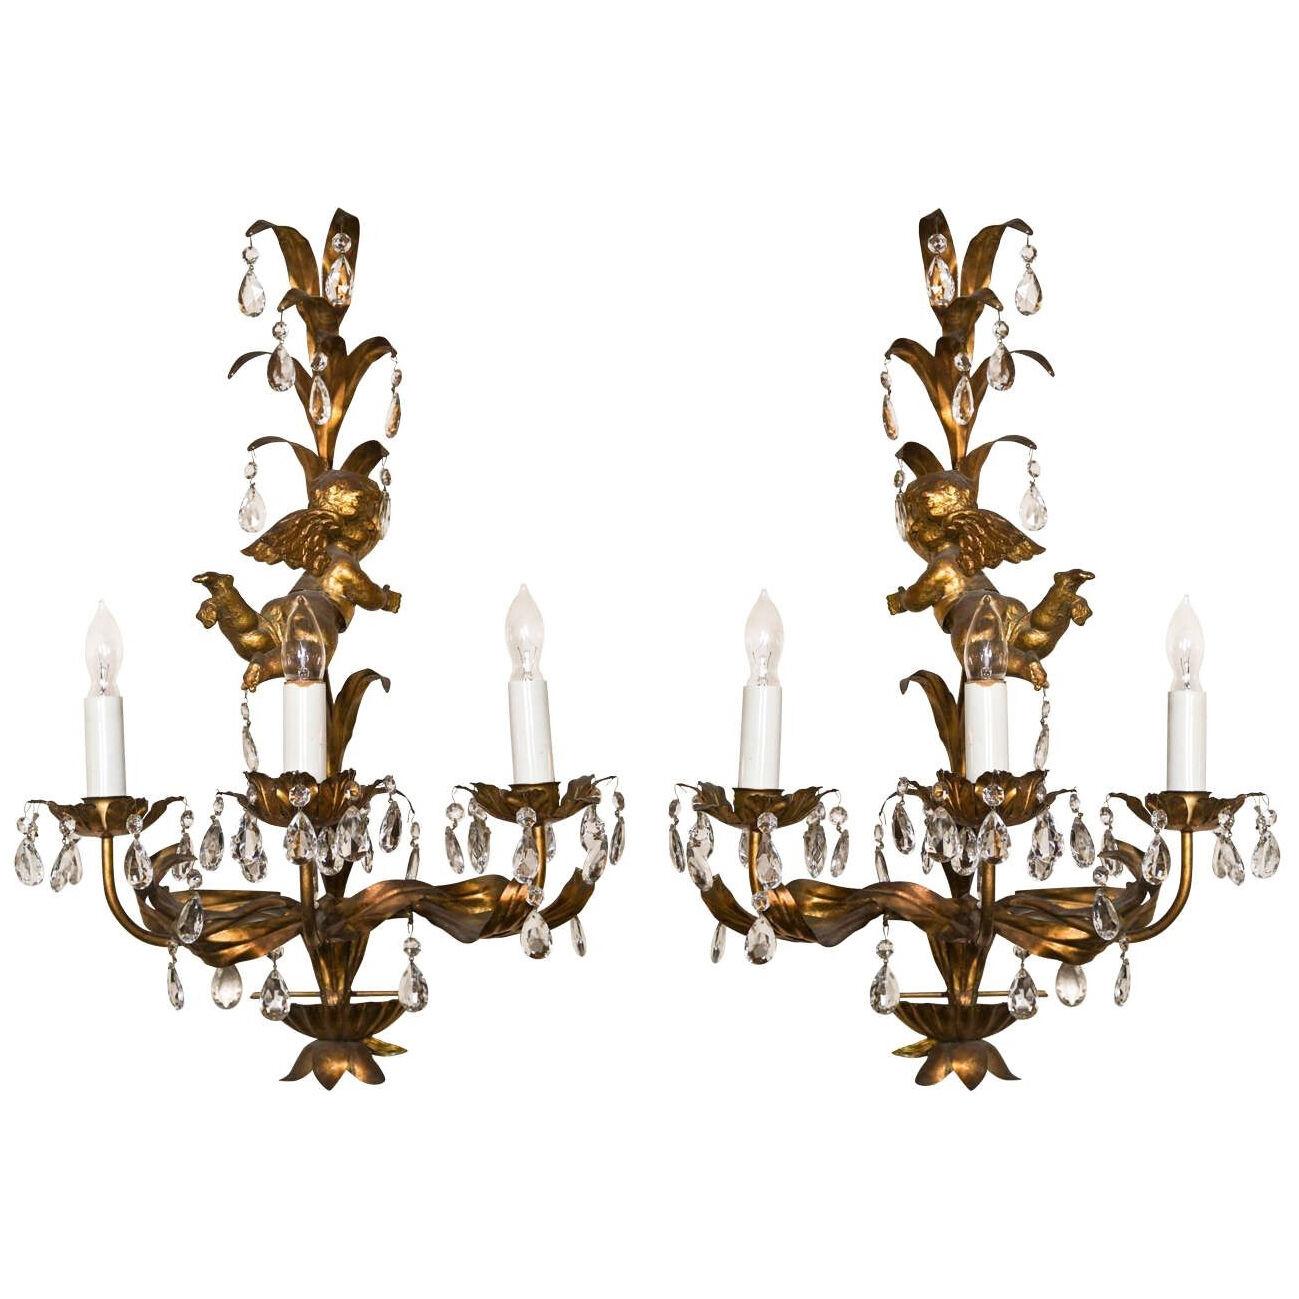 French Marie Therese Style Gilt-Brass Three-Light Wall Sconces Cherub Figures